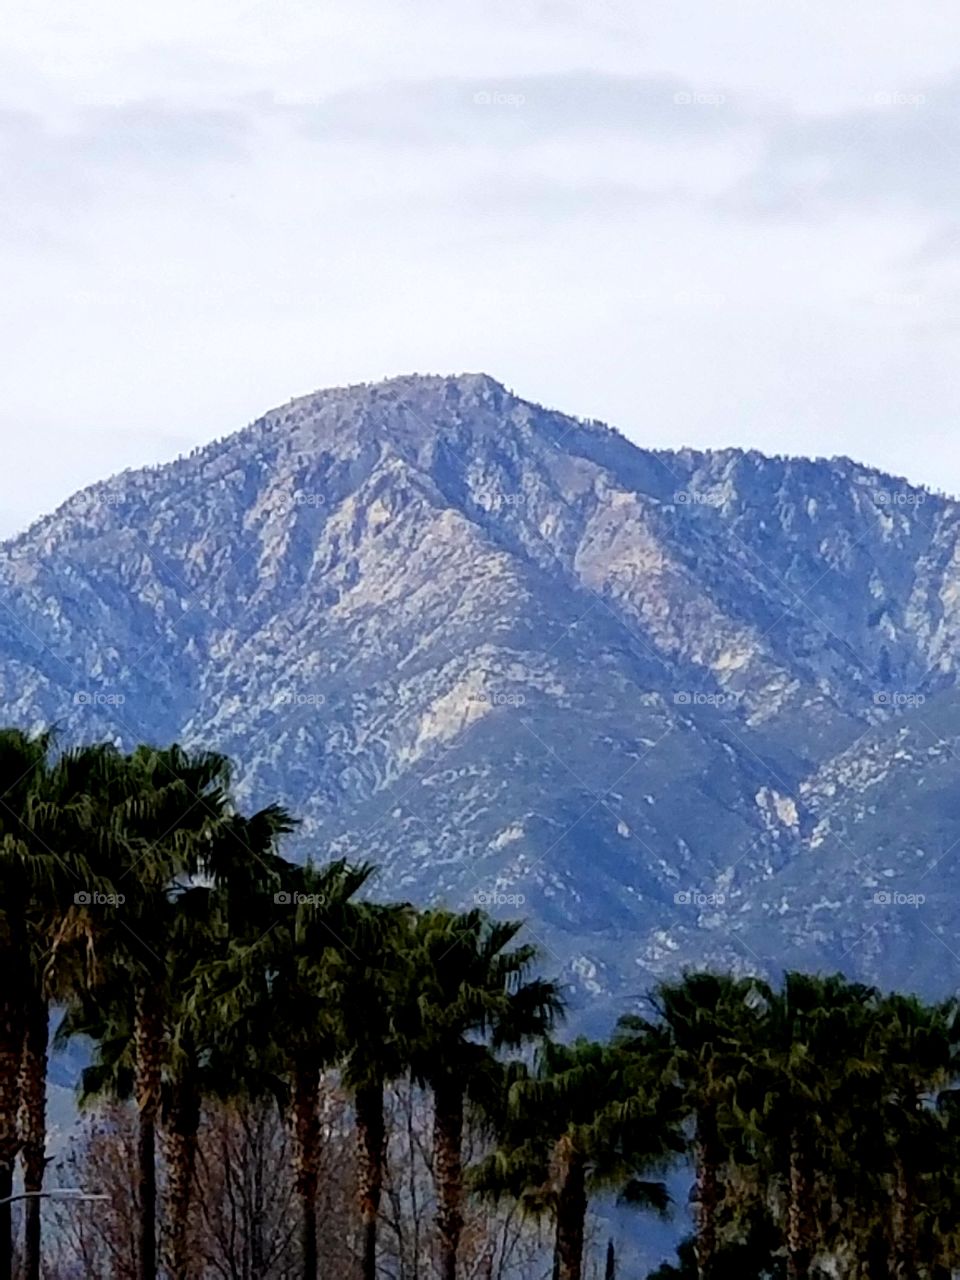 Palm trees by the mountains